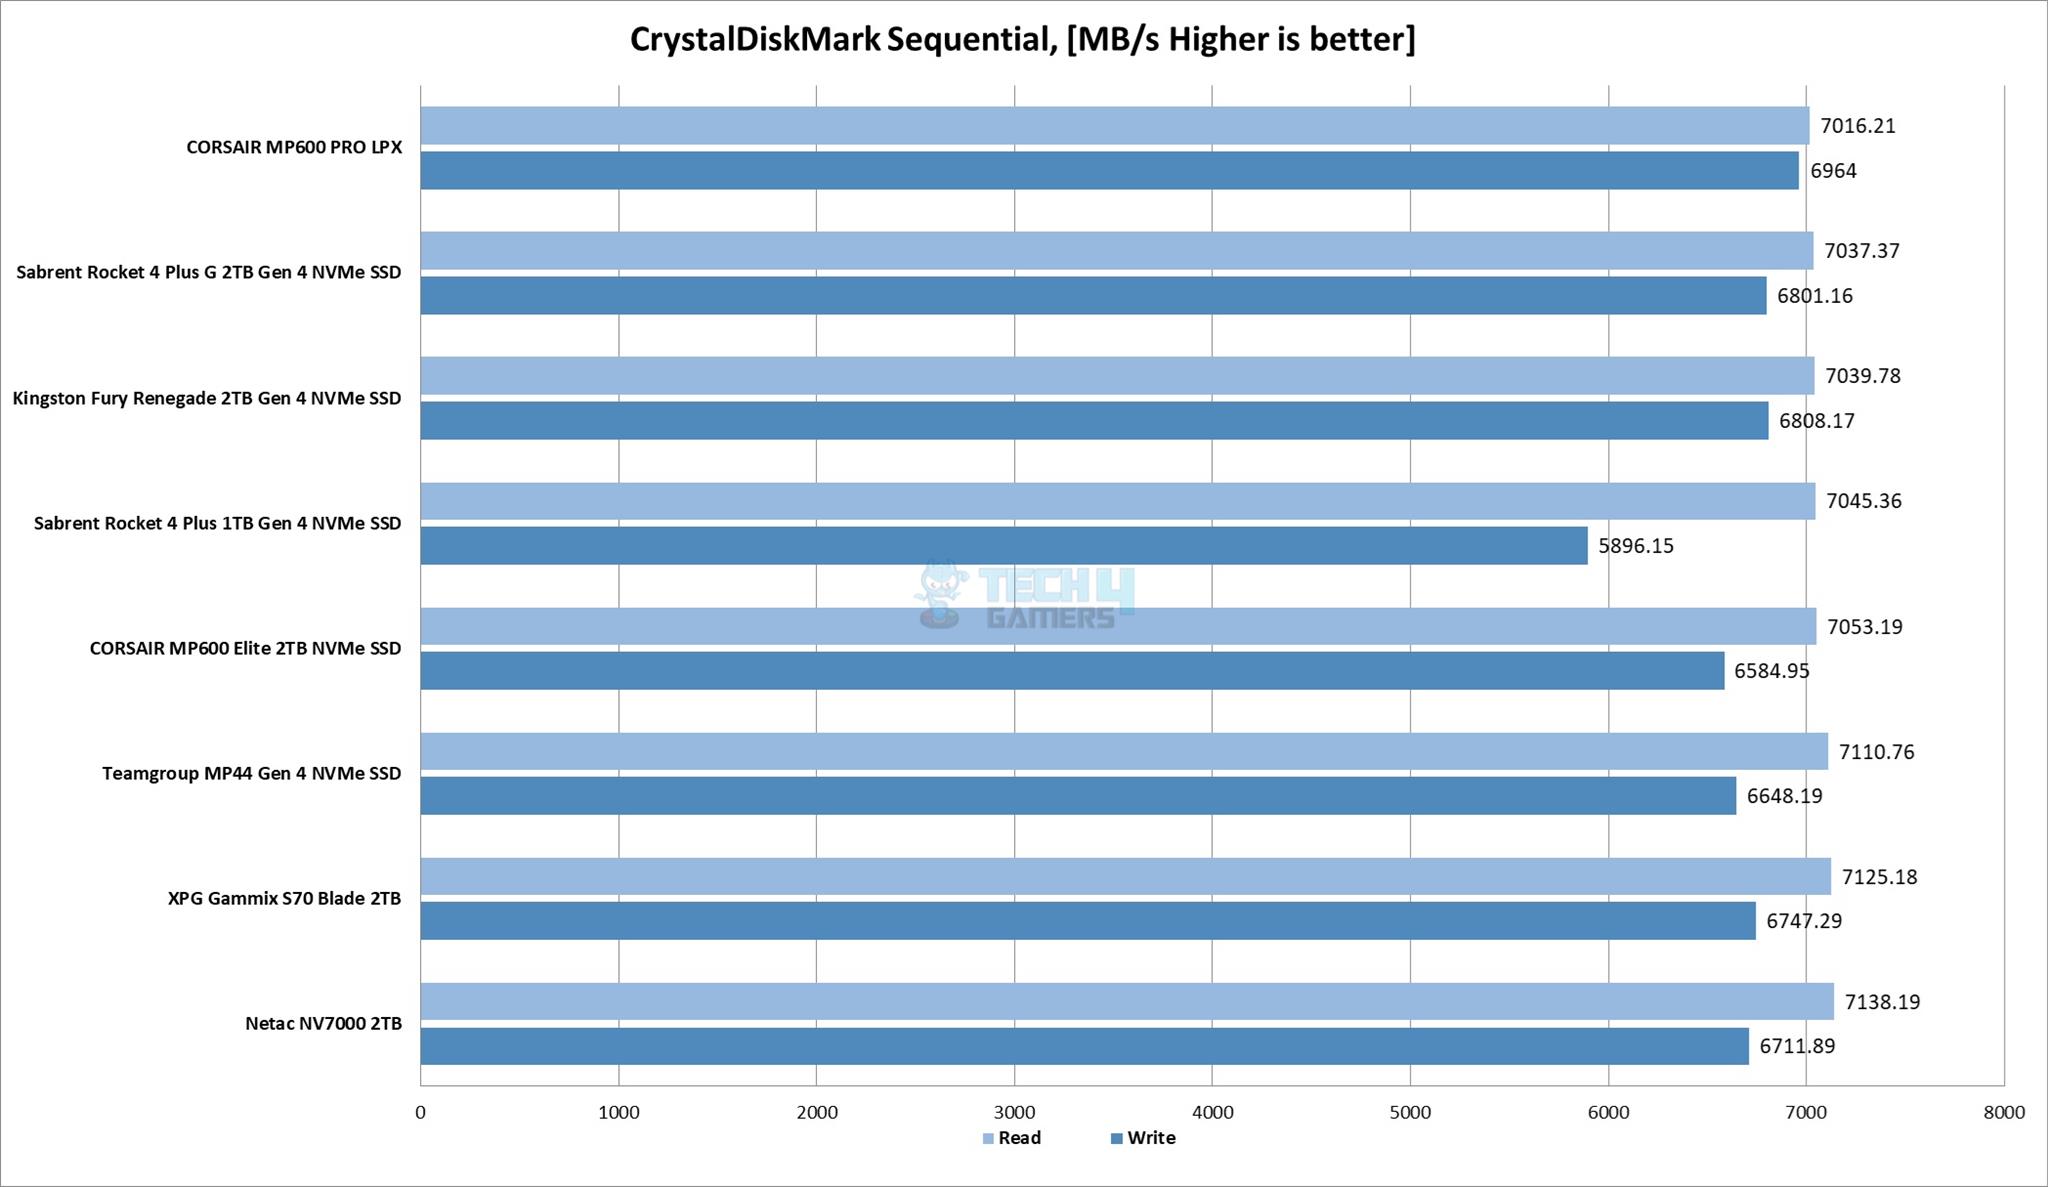 CrystalDiskMark Sequential (Image By Tech4Gamers)